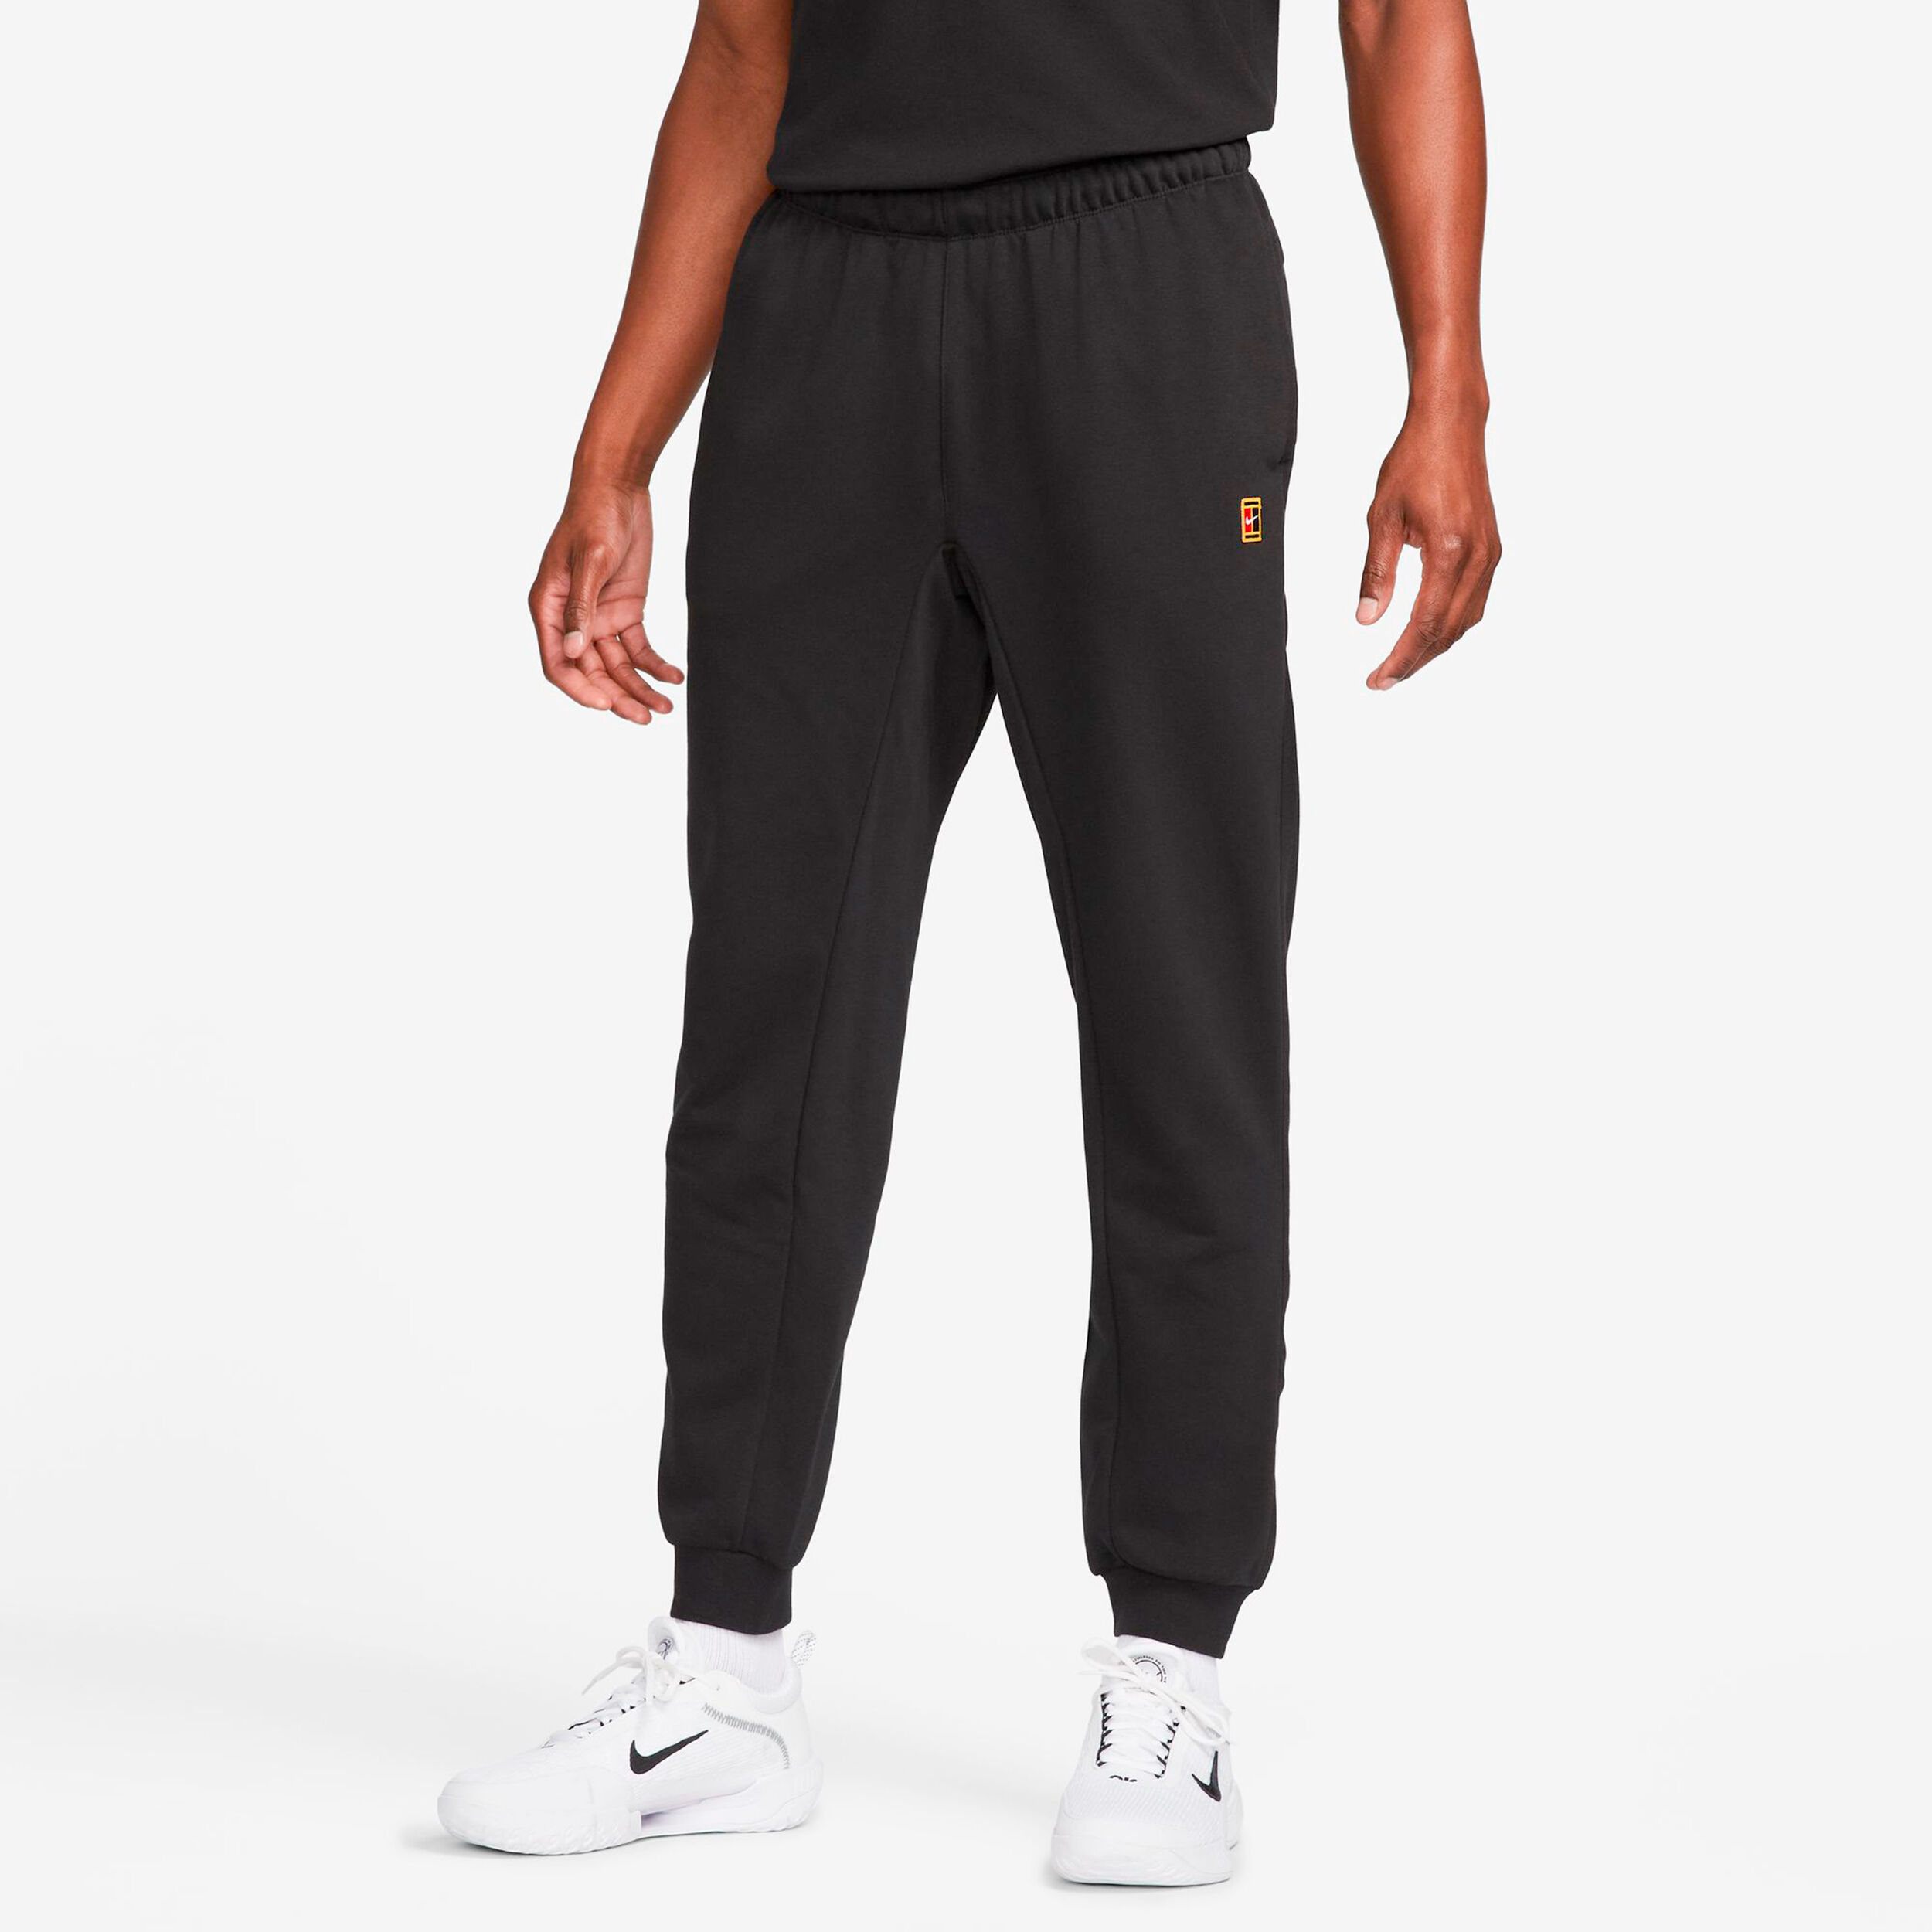 Nike Mens Dri-Fit Challenger Woven Pants in Black, Different Sizes,  DD4894-010 | eBay